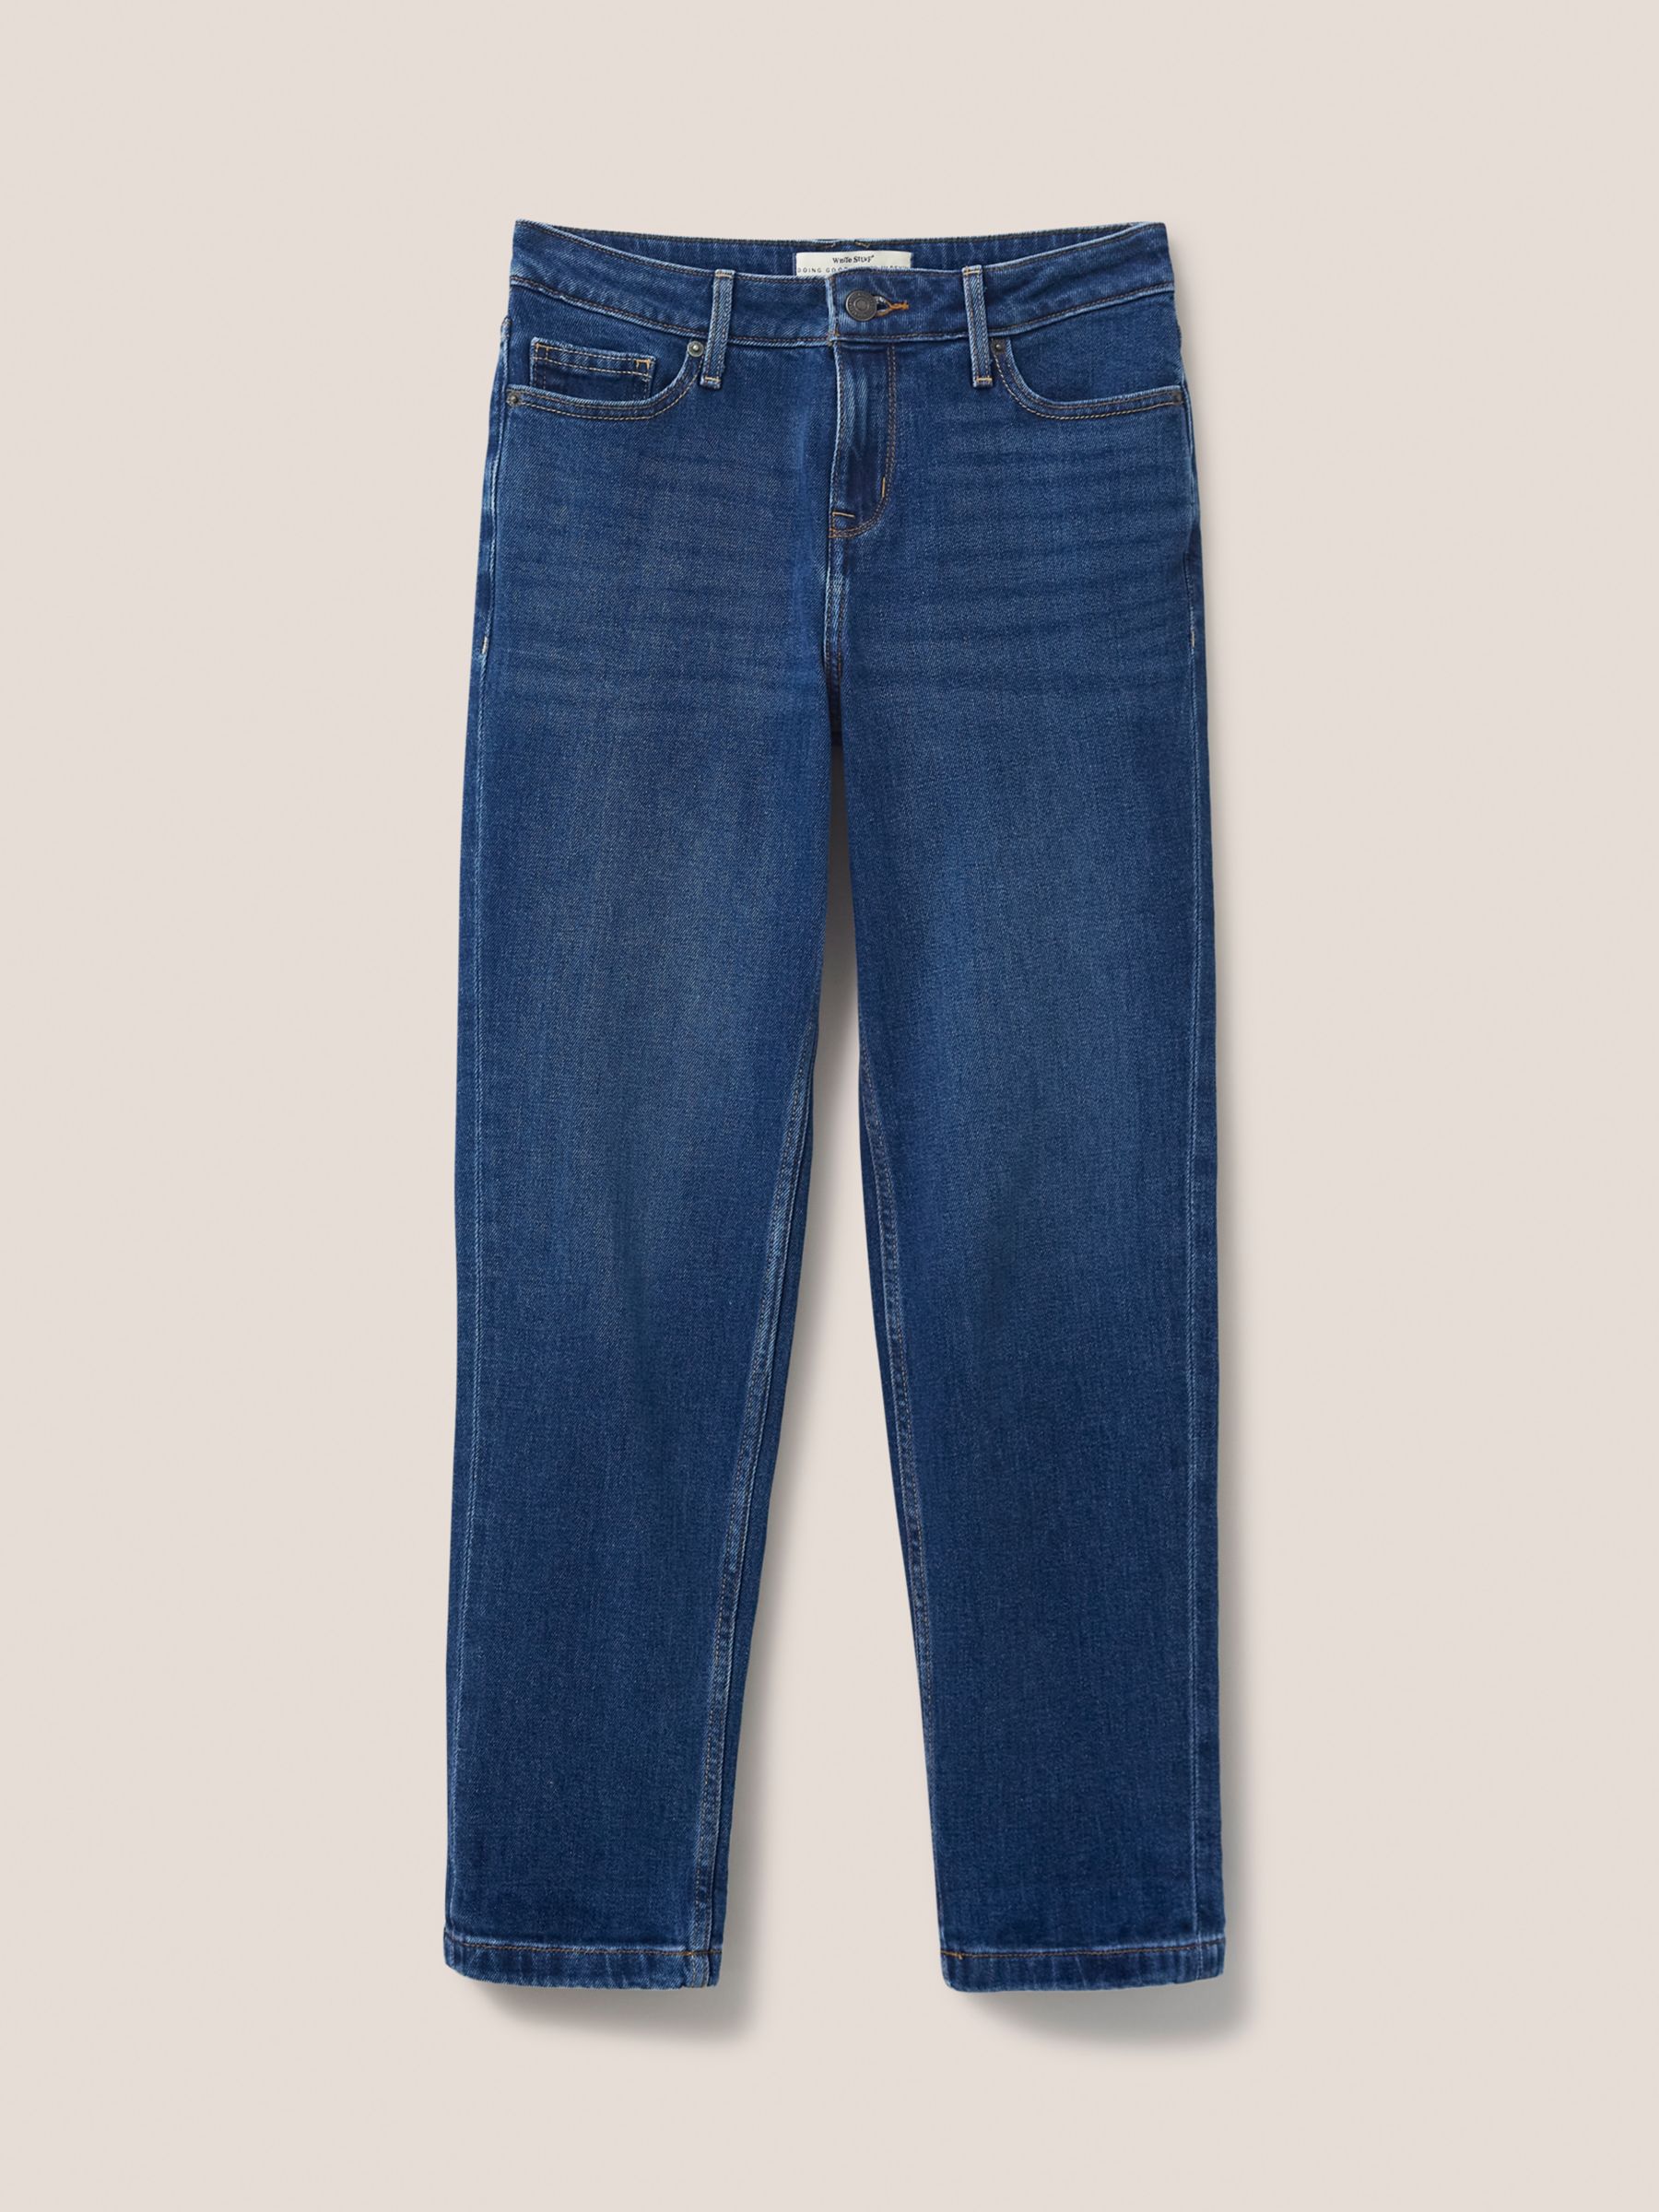 White Stuff Katy Relaxed Slim Fit Jeans, Mid Denim at John Lewis & Partners